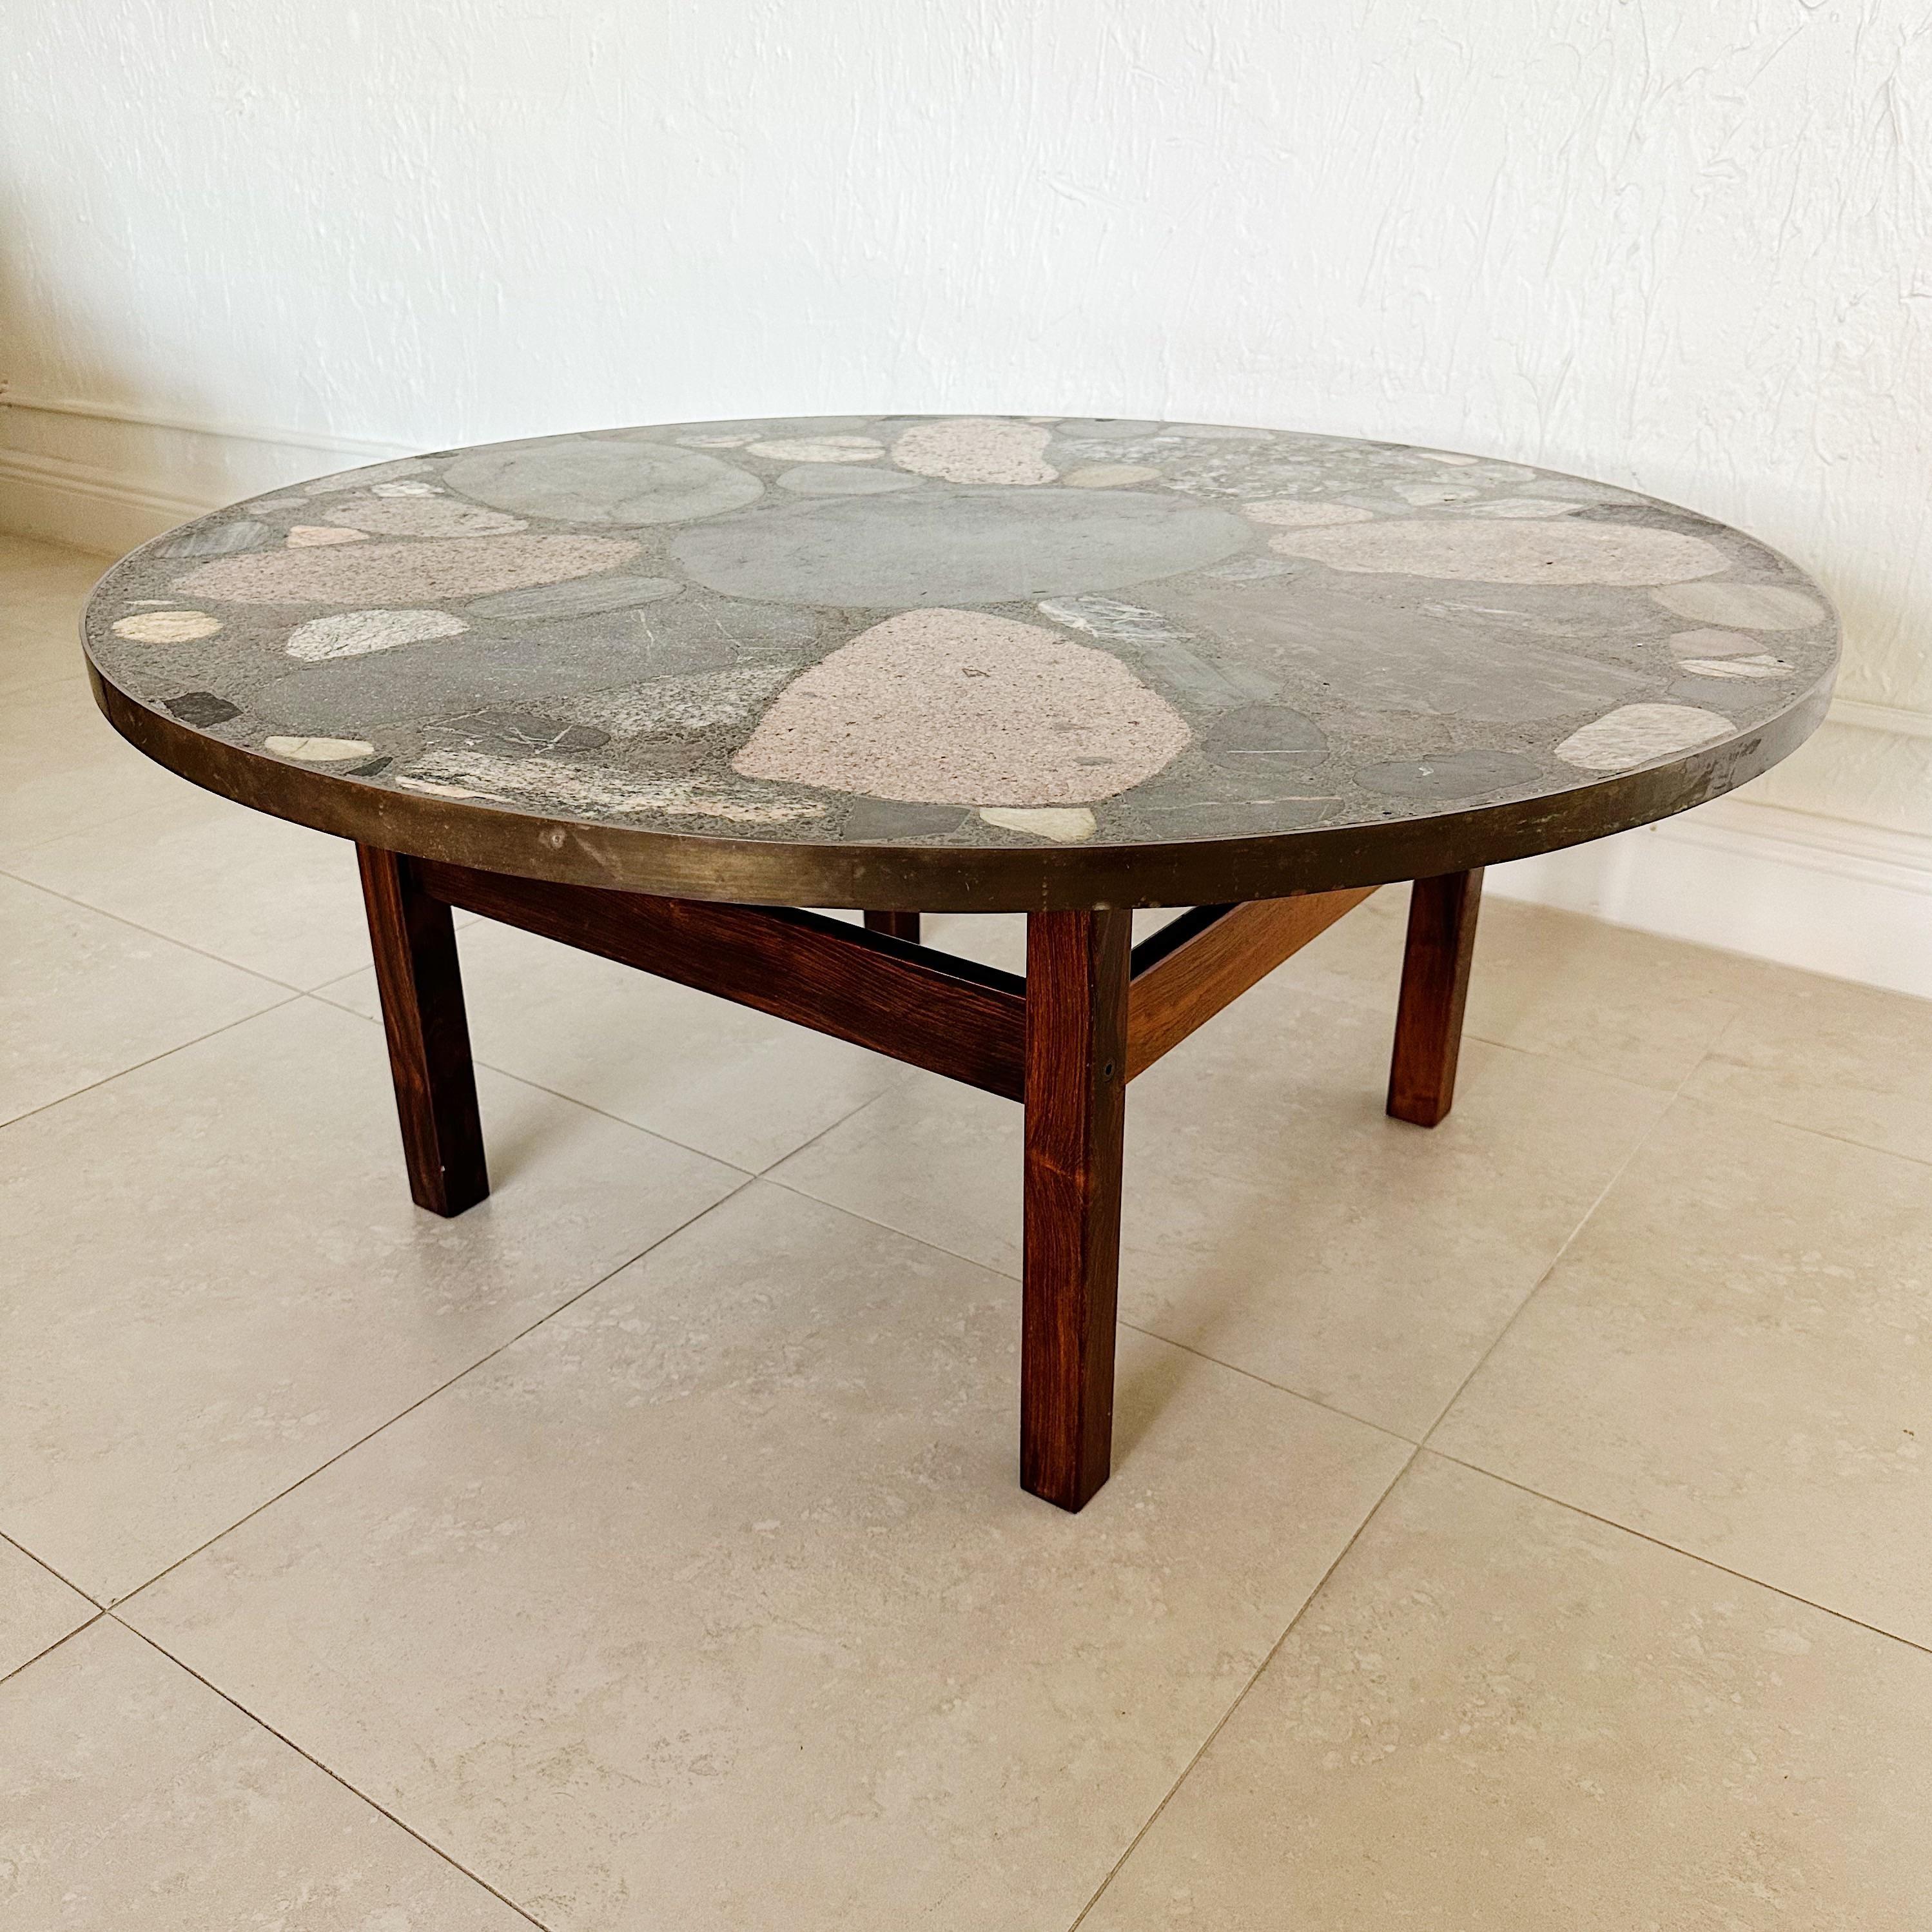 Hand-Crafted Erling Viksjo Terrazzo Congo Coffee Table Produced in Norway